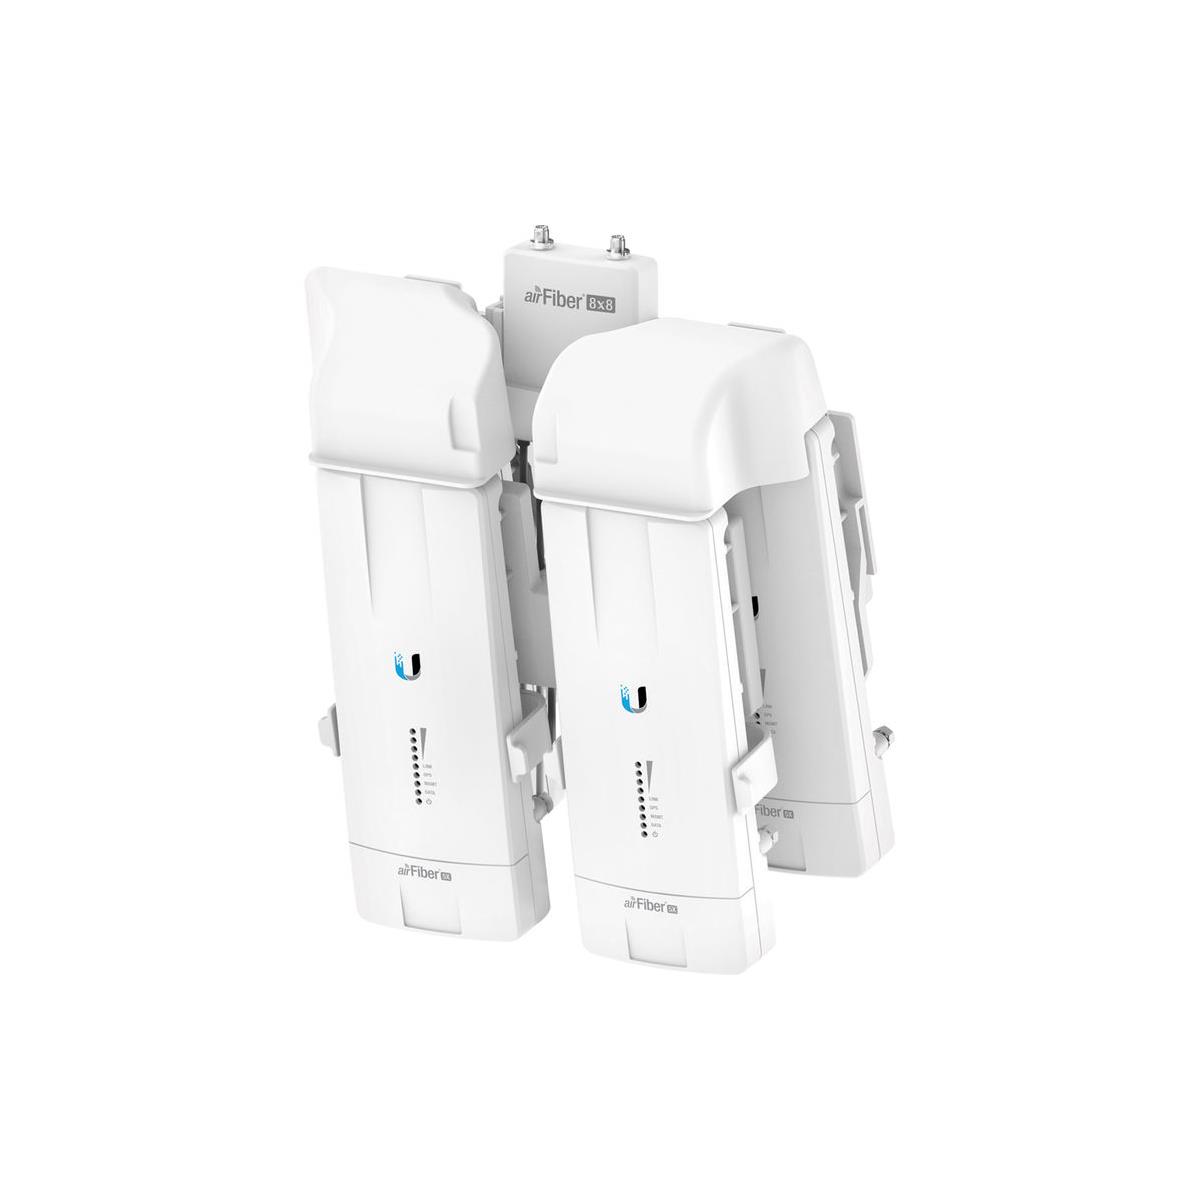 Image of Ubiquiti Networks 8x8 Scalable airFiber MIMO Multiplexer